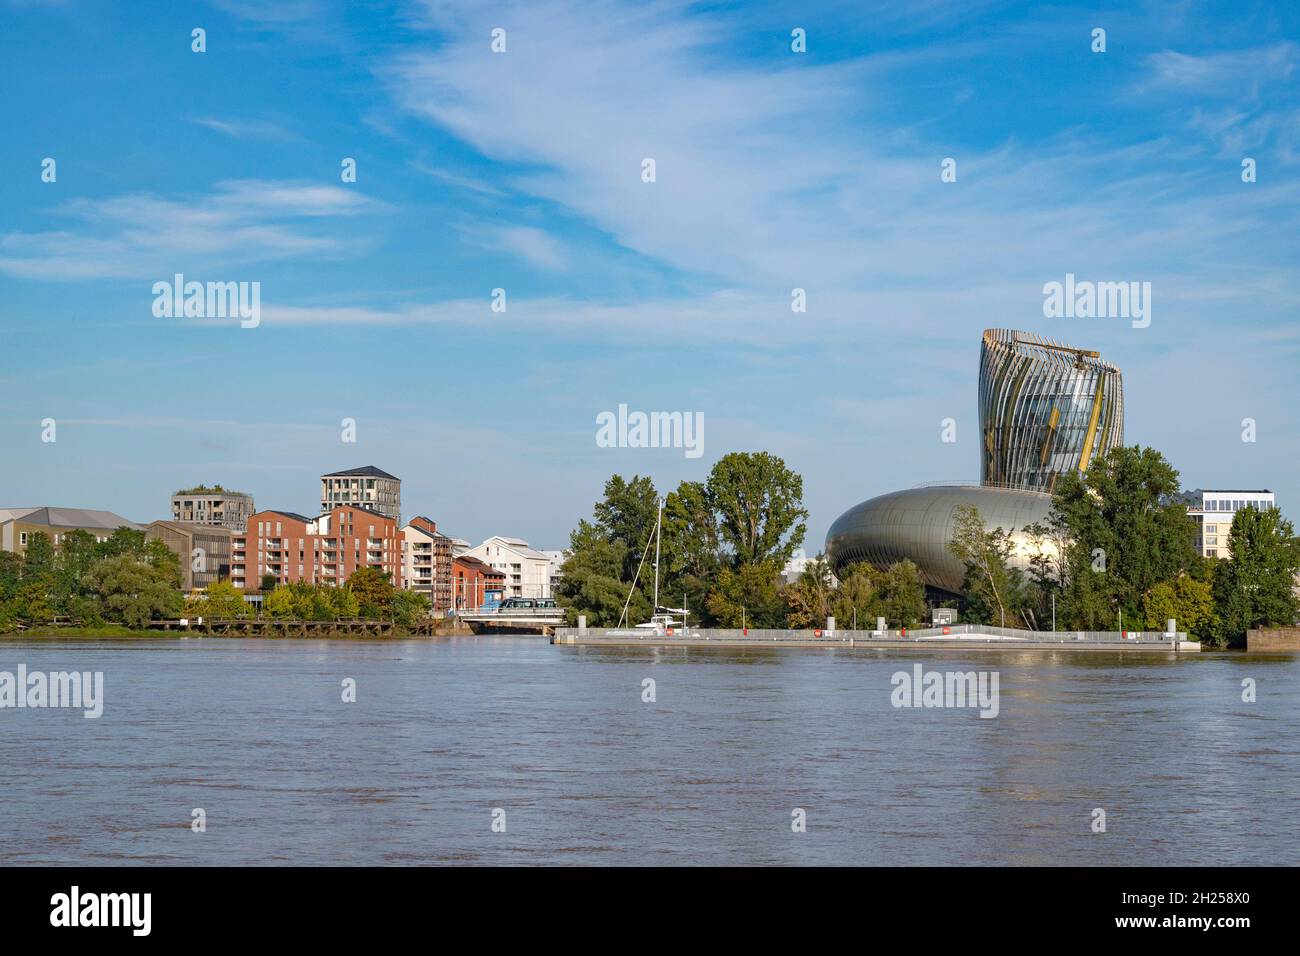 The entrance of the Bassins à flot and the cité du vin seen from the right bank of the Garonne river in Bordeaux. France Stock Photo